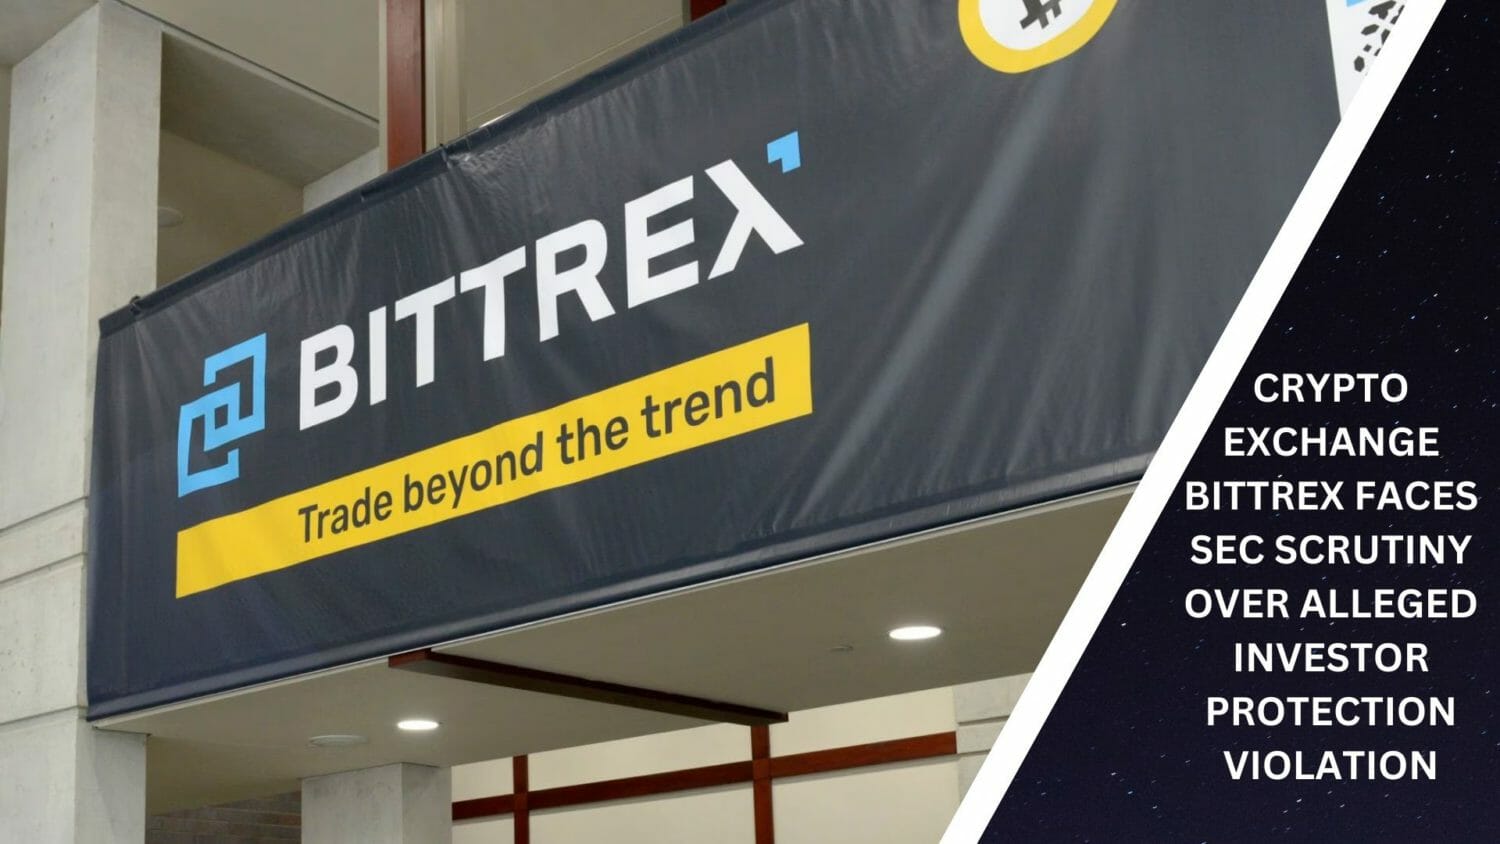 Crypto Exchange Bittrex Faces Sec Scrutiny Over Alleged Investor Protection Violation